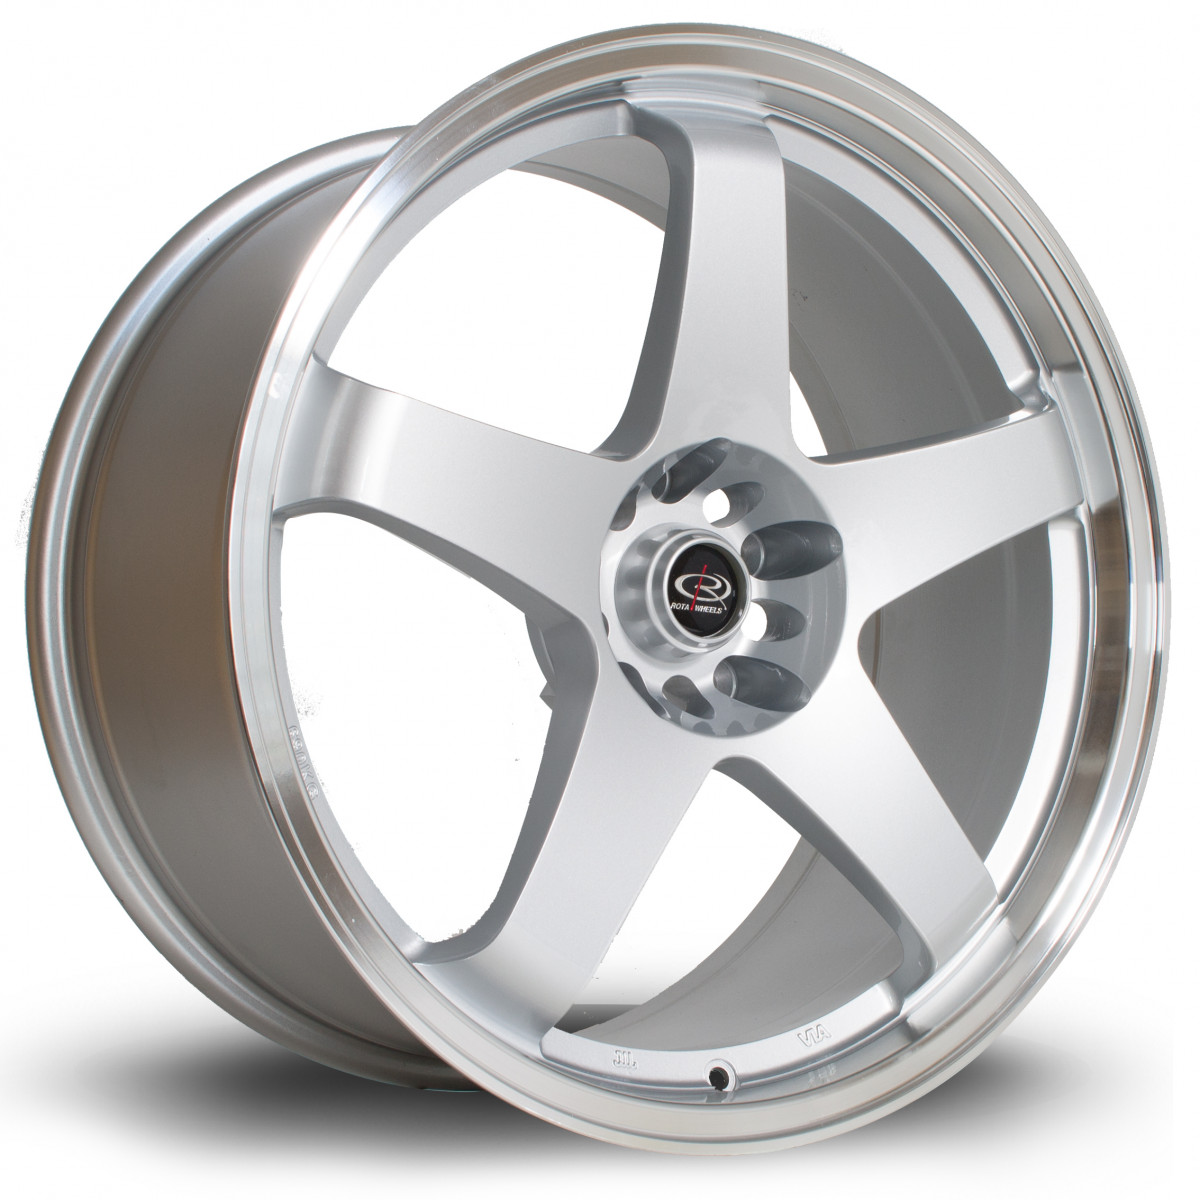 GTR 19x9 5x114 ET20 Silver with Polished Lip